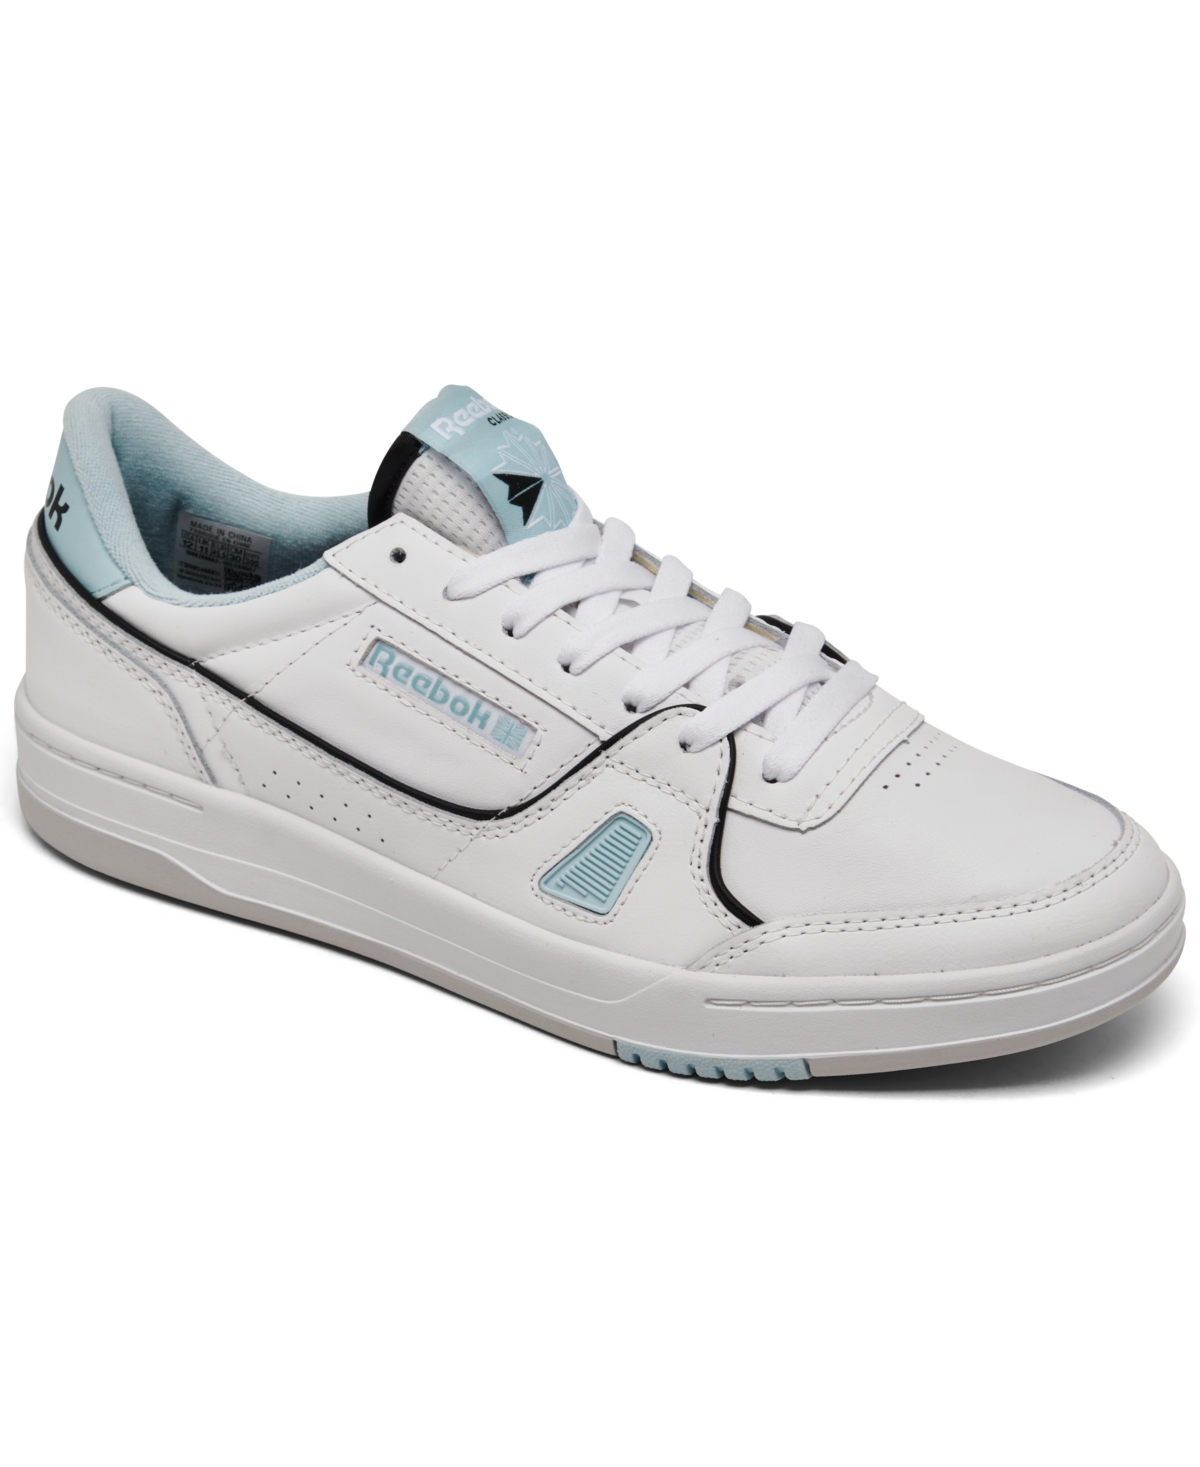 Men's Casual Sneakers from Finish Line - White/Gum